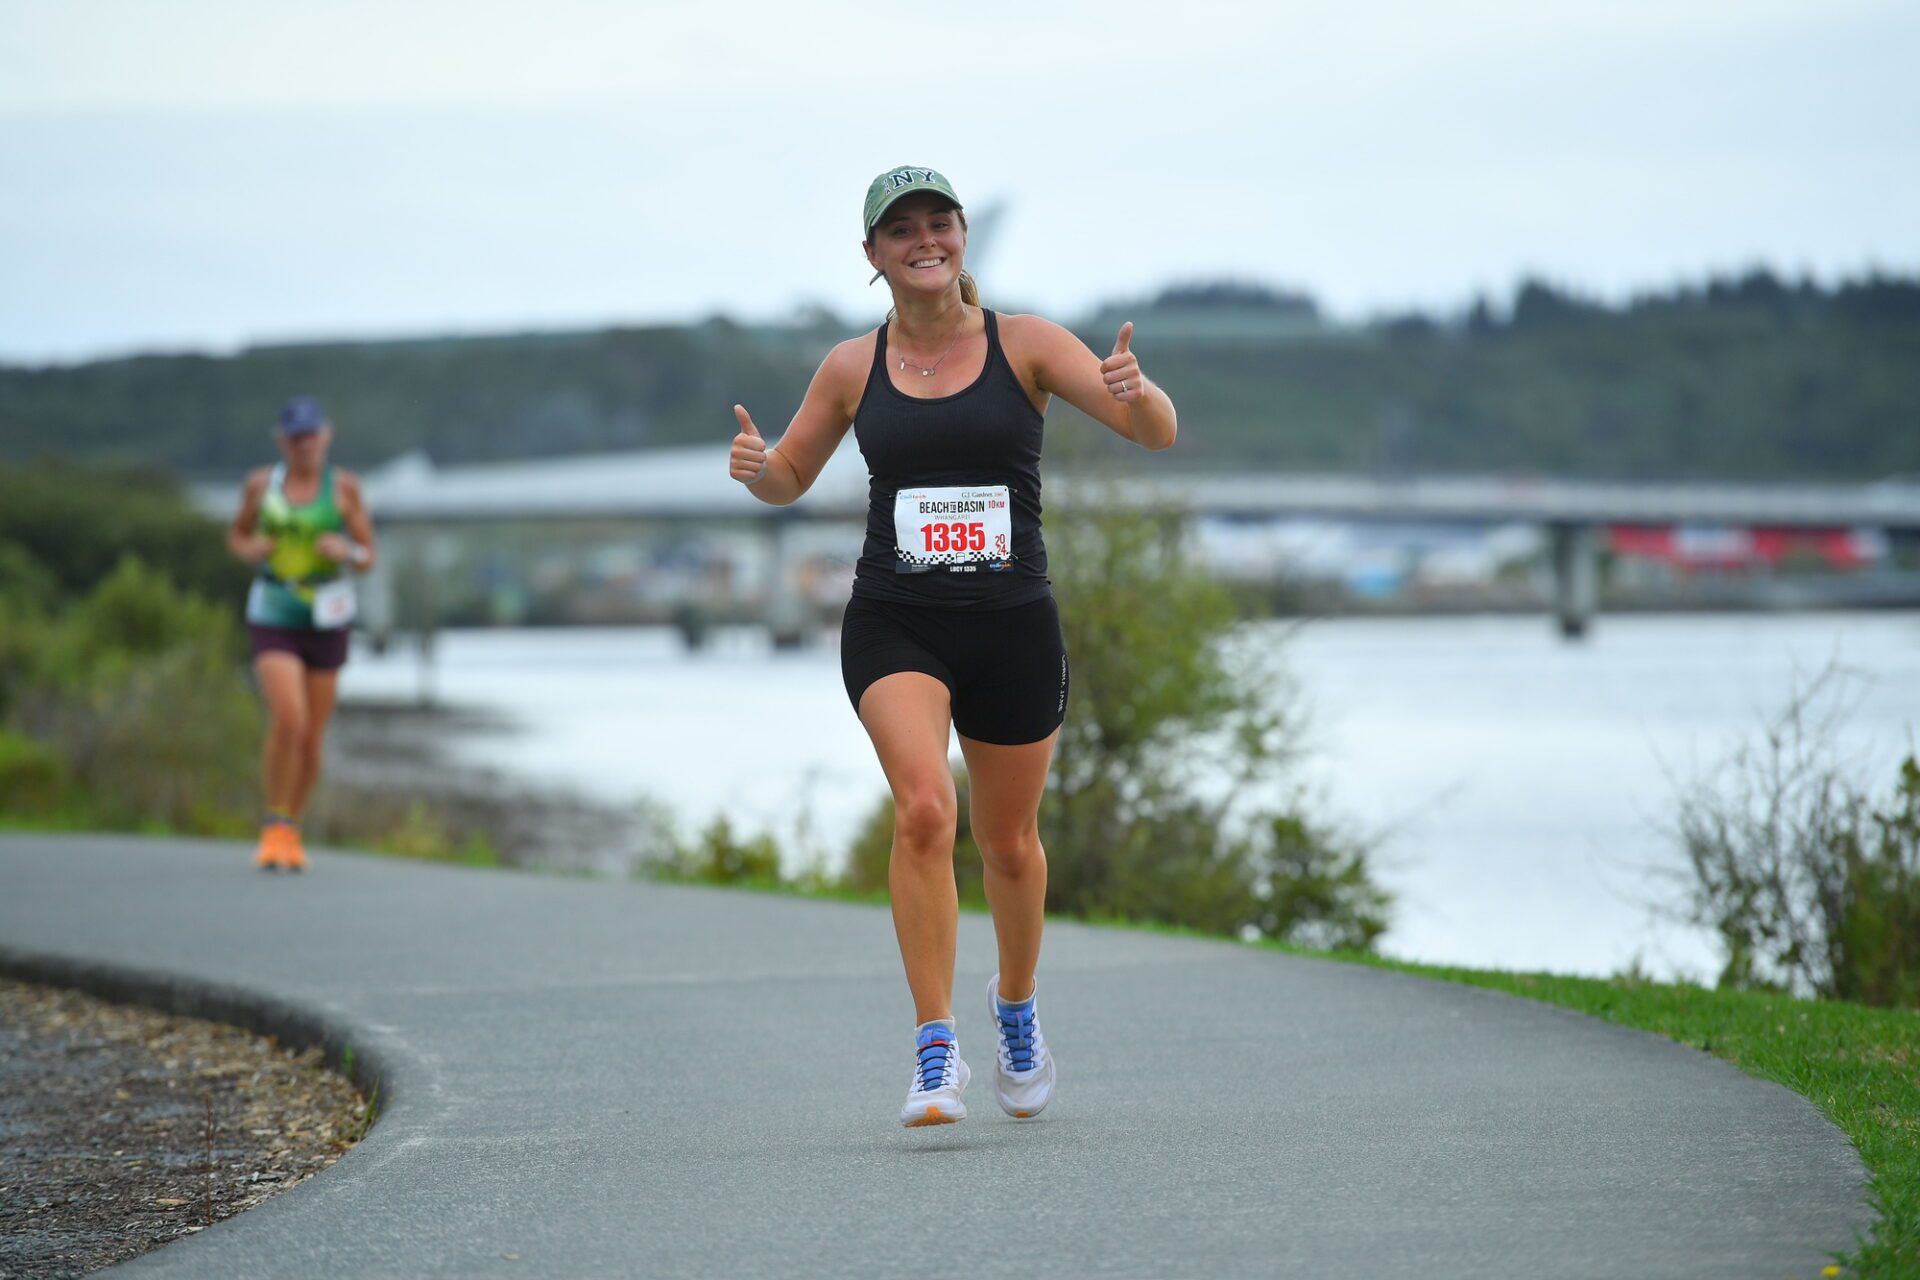 Woman gives thumbs up while running